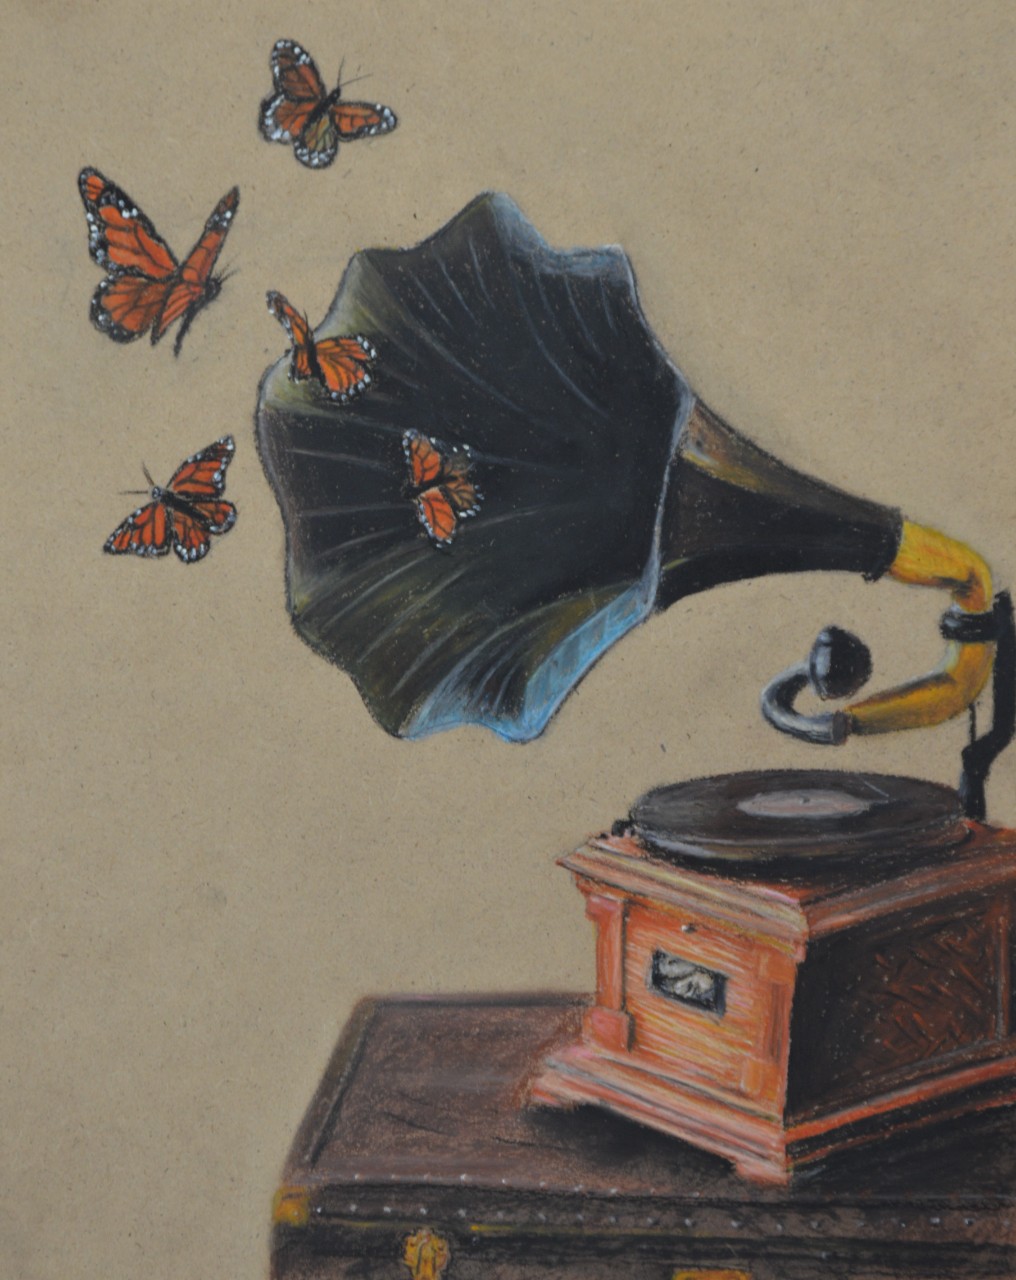 The painting is of an old-time black, yellow and brown Victrola with a long-playing record sitting on a dark brown side table. Coming out of the fluted horn of the Victrola are five orange, black and white butterflies.